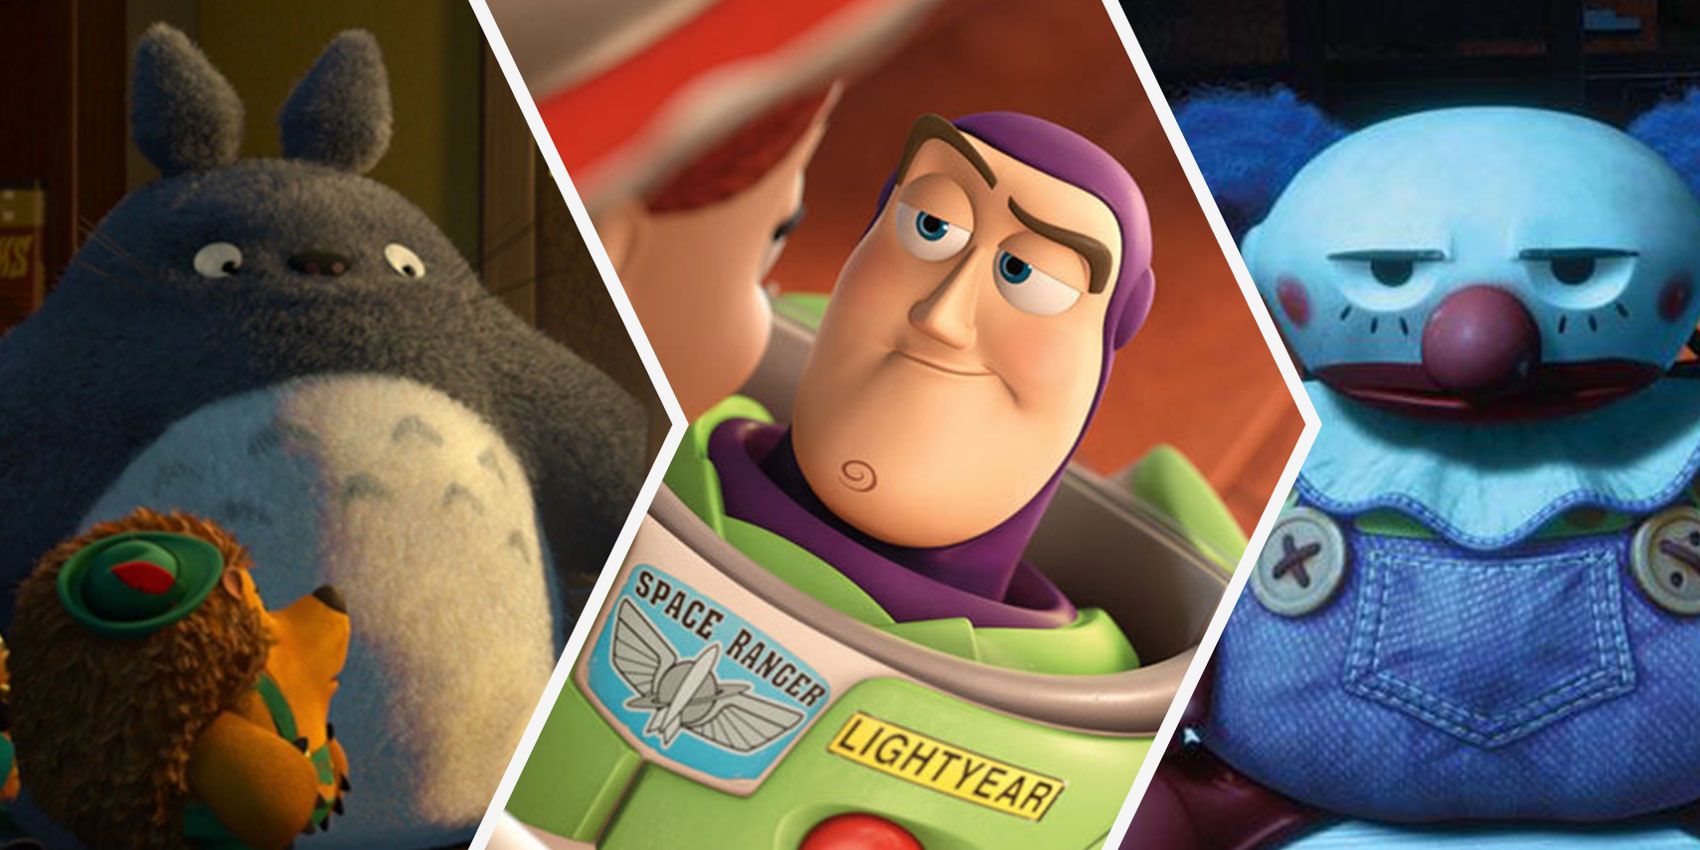 Toy Four Y 10 Toy Story Characters We Want To See And 5 That Should Stay In The Toy Box